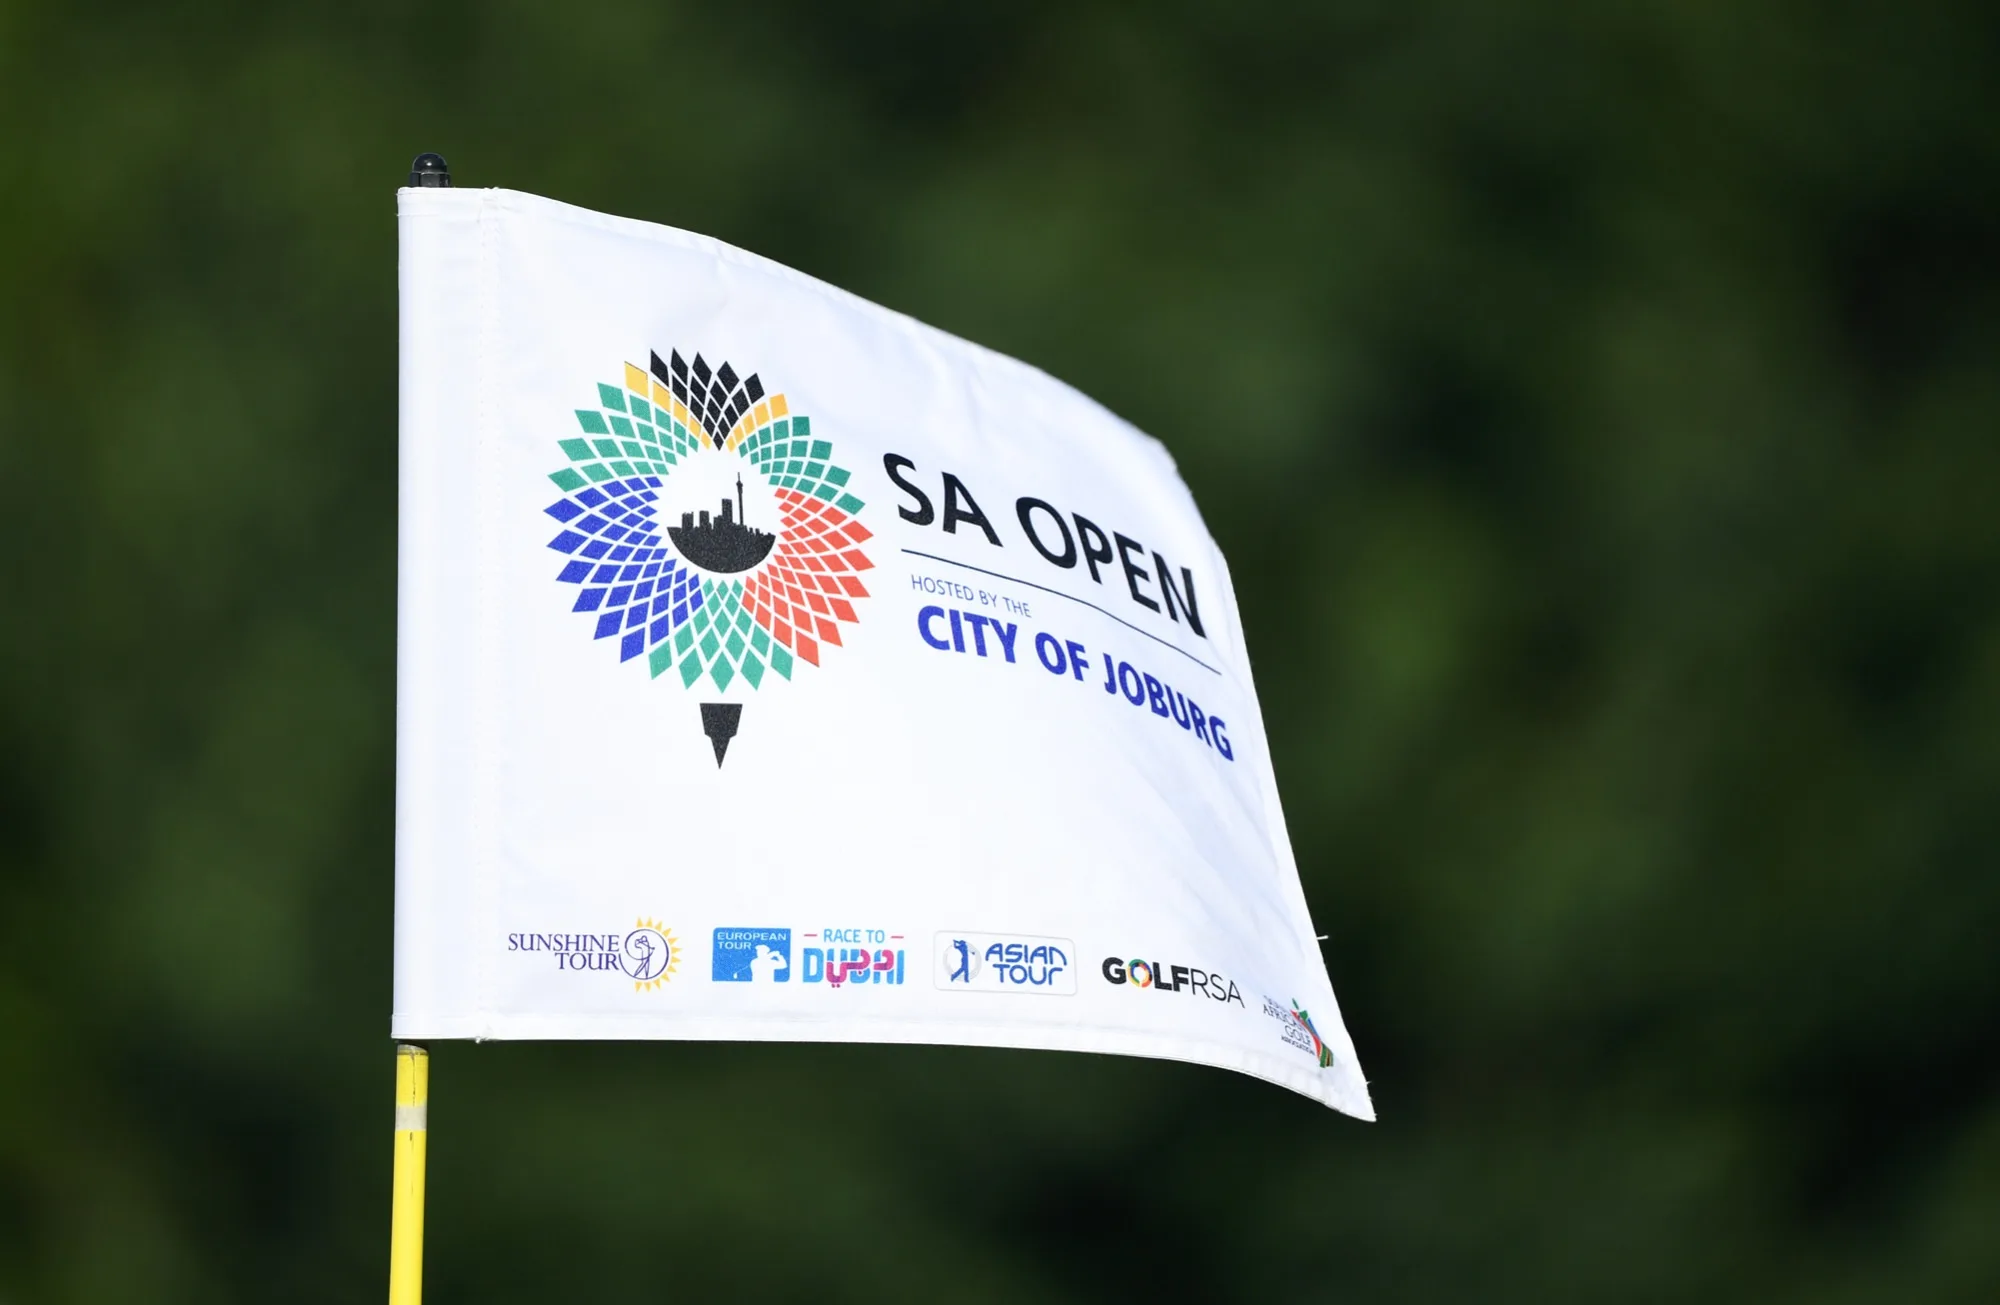 South African Open prize money 2020